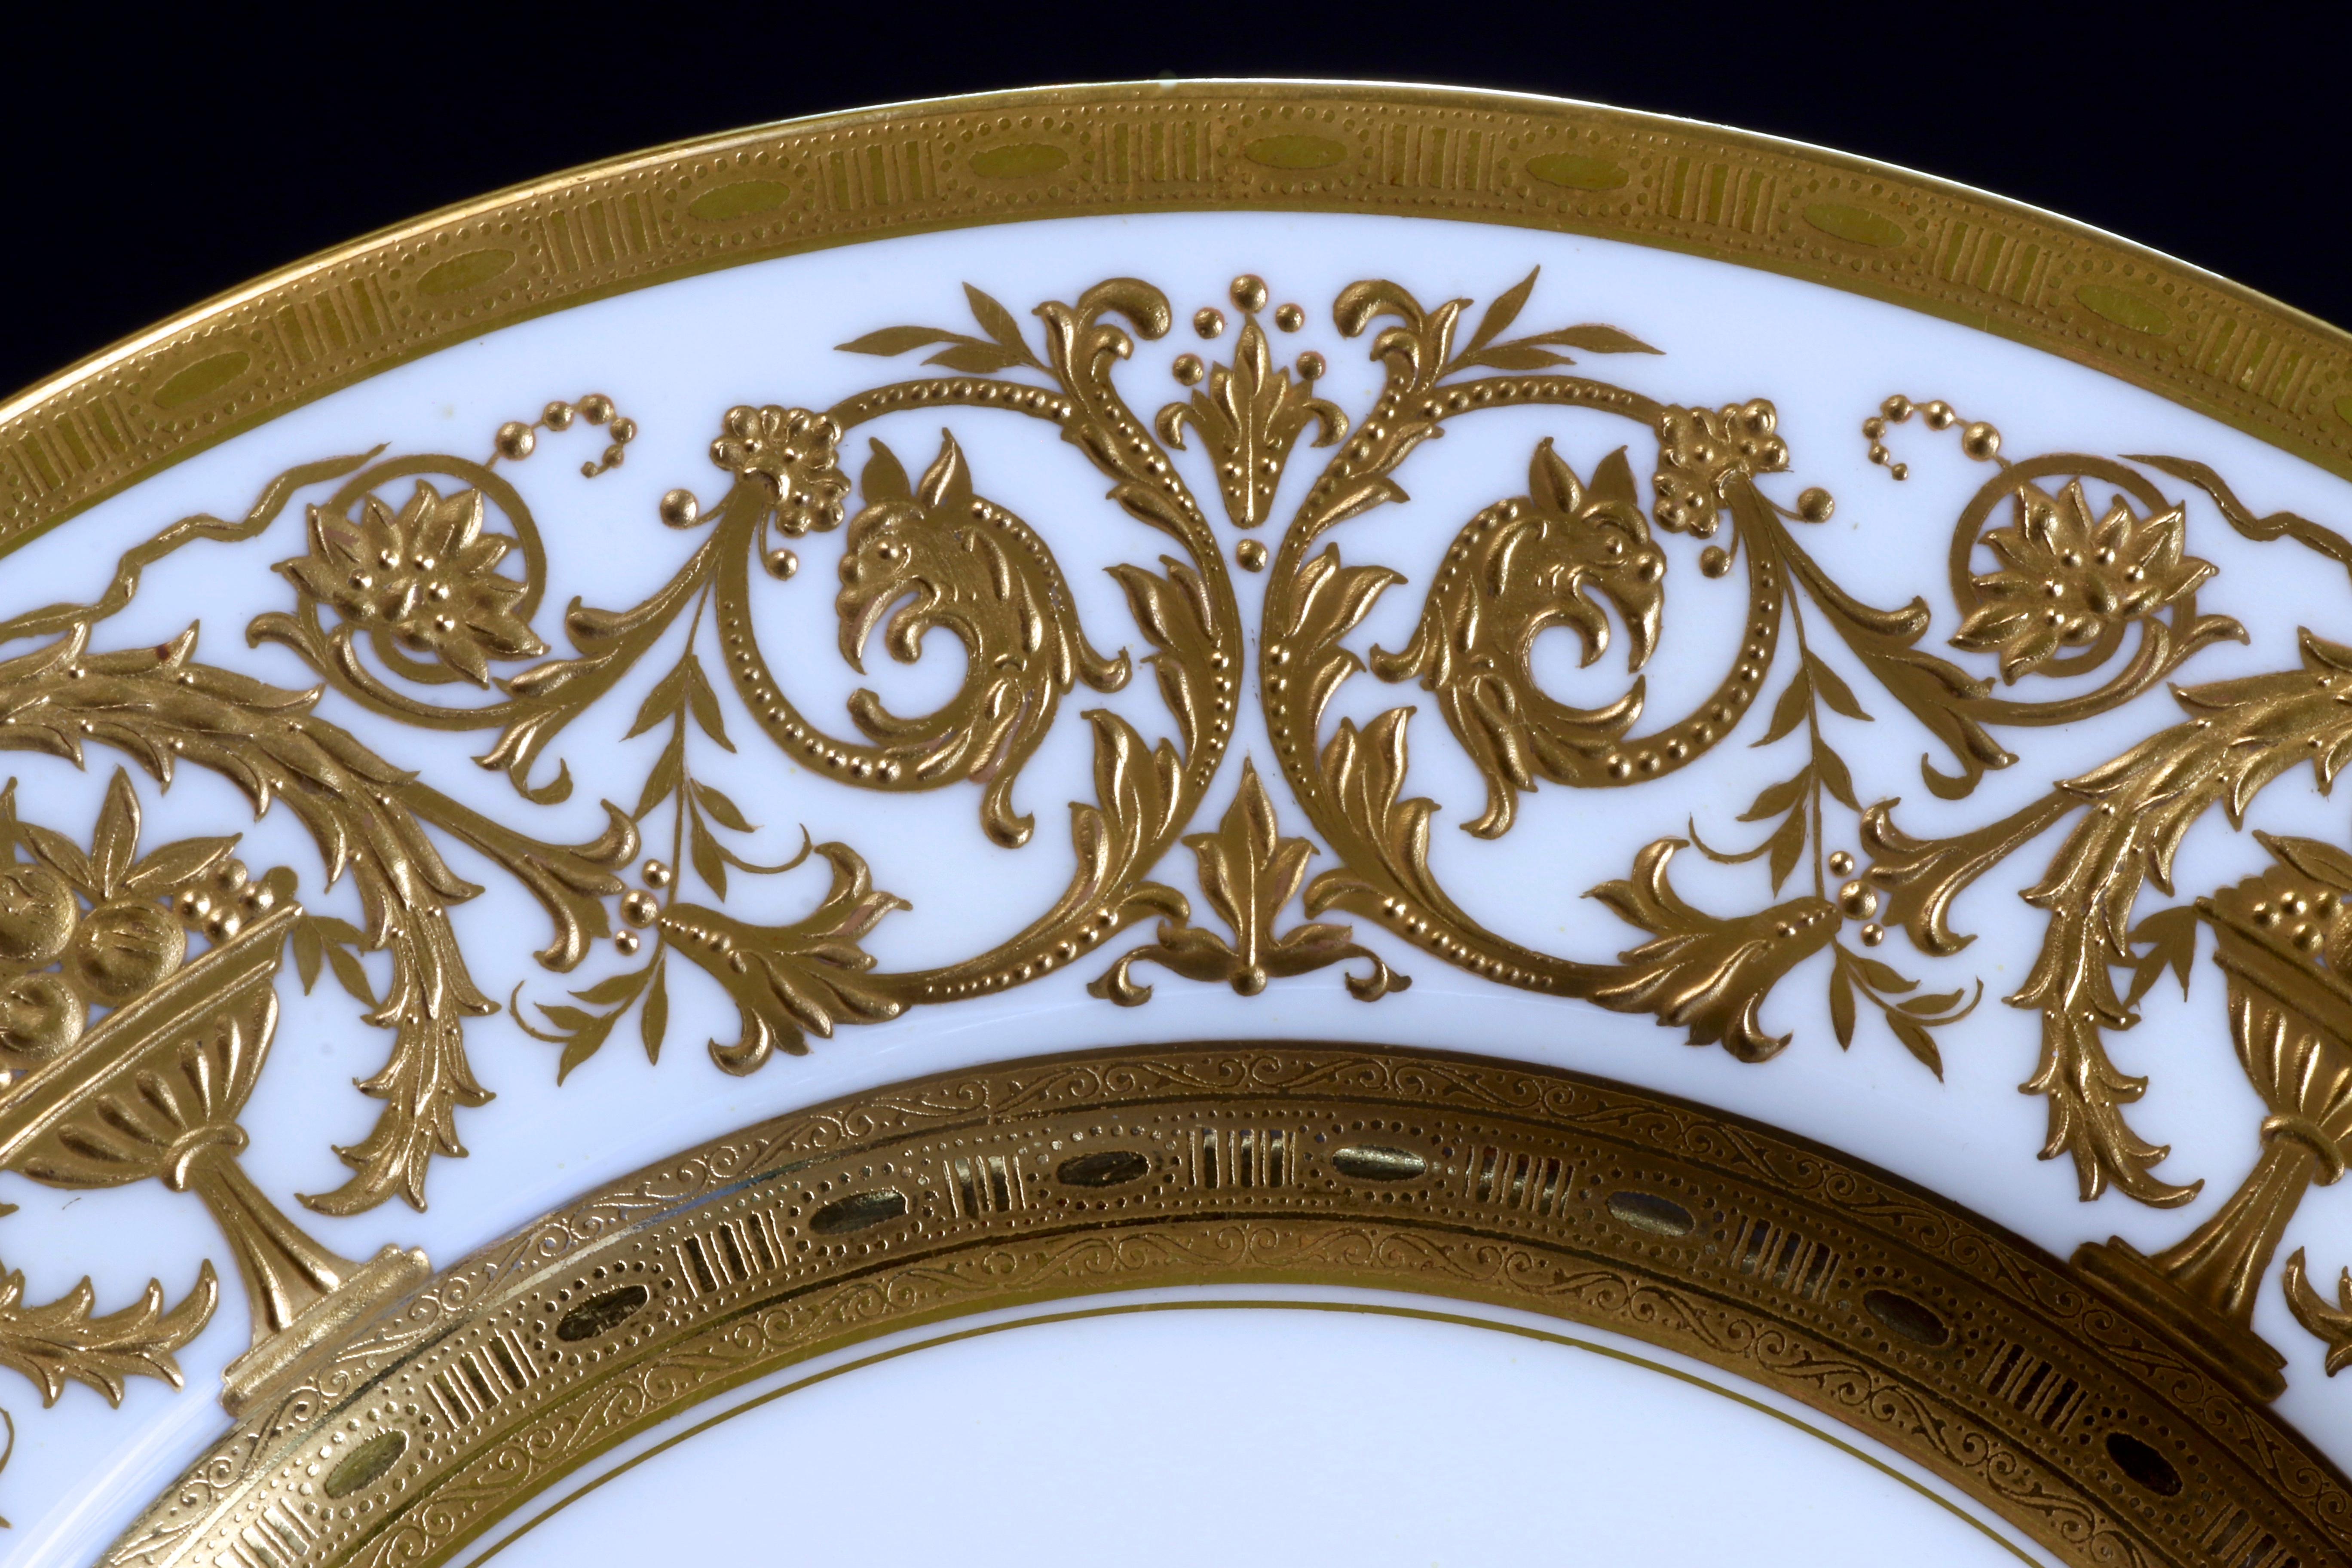 The 12 custom gilded dinner plates offer some of the finest gilding we at Gilded Age Dining have ever had the pleasure to examine. The gold is extremely thick, there is so much gold on these plates that they are quite heavy, a single plate weighs 18